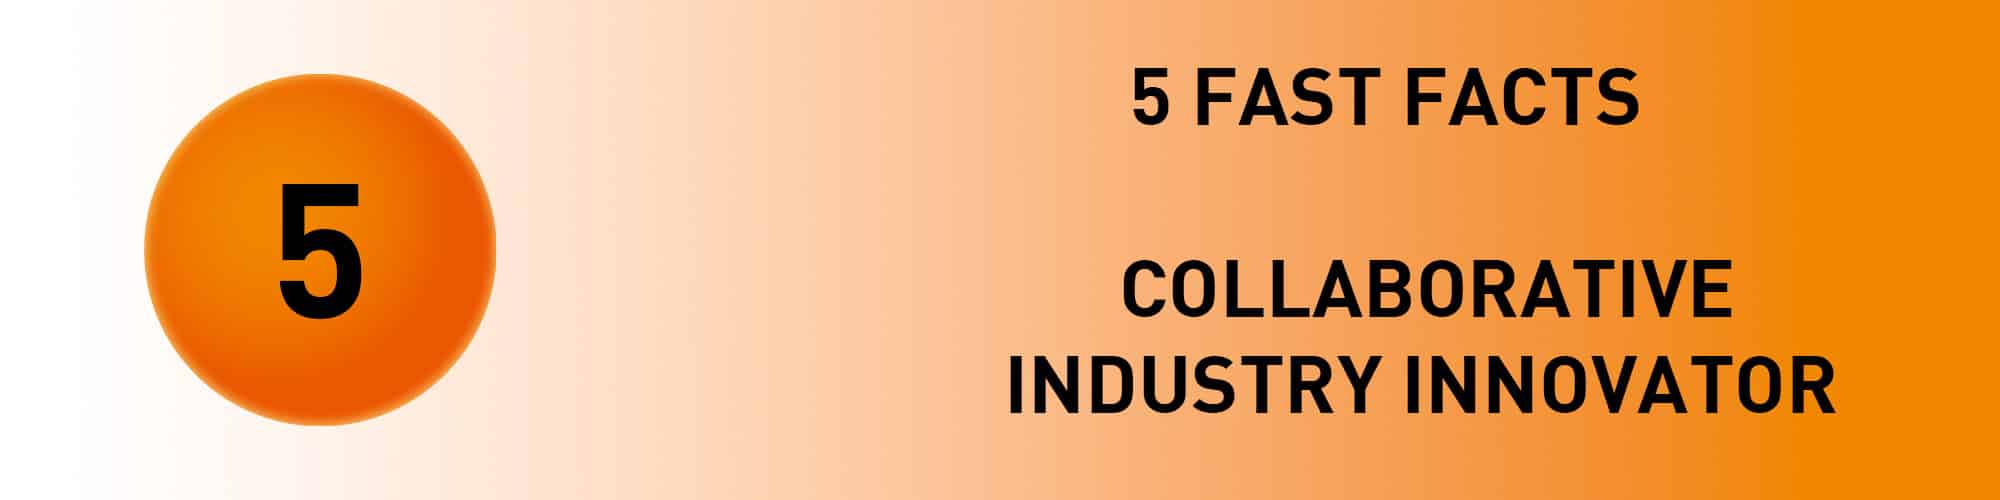 5 FAST FACTS: Collaborative Industry Innovator